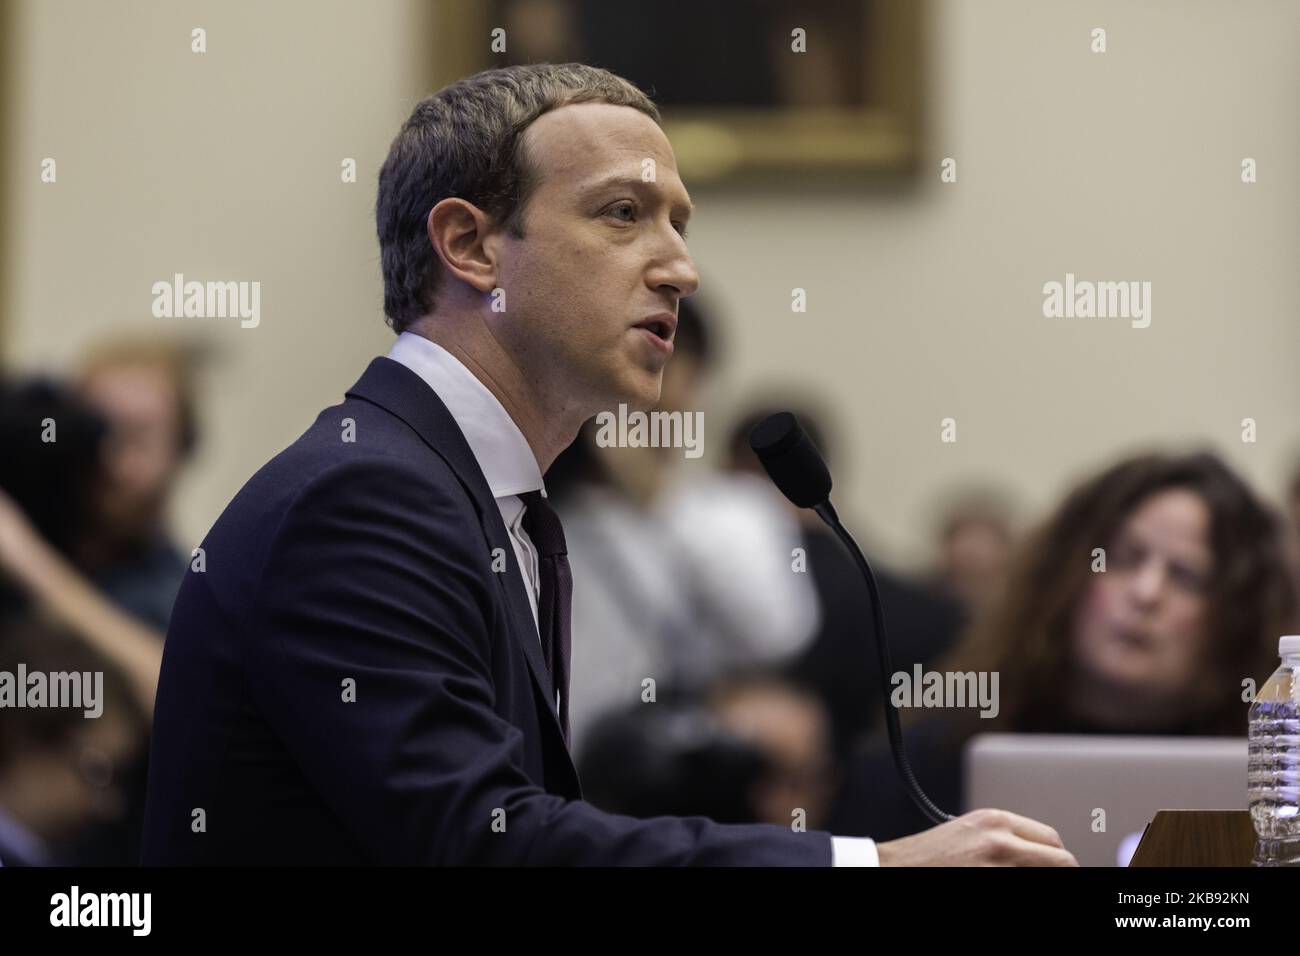 The Facebook CEO, Mark Zuckerberg, testified before the House Financial Services Committee on Wednesday, October 23, 2019 Washington, D.C. (Photo by Aurora Samperio/NurPhoto) Stock Photo